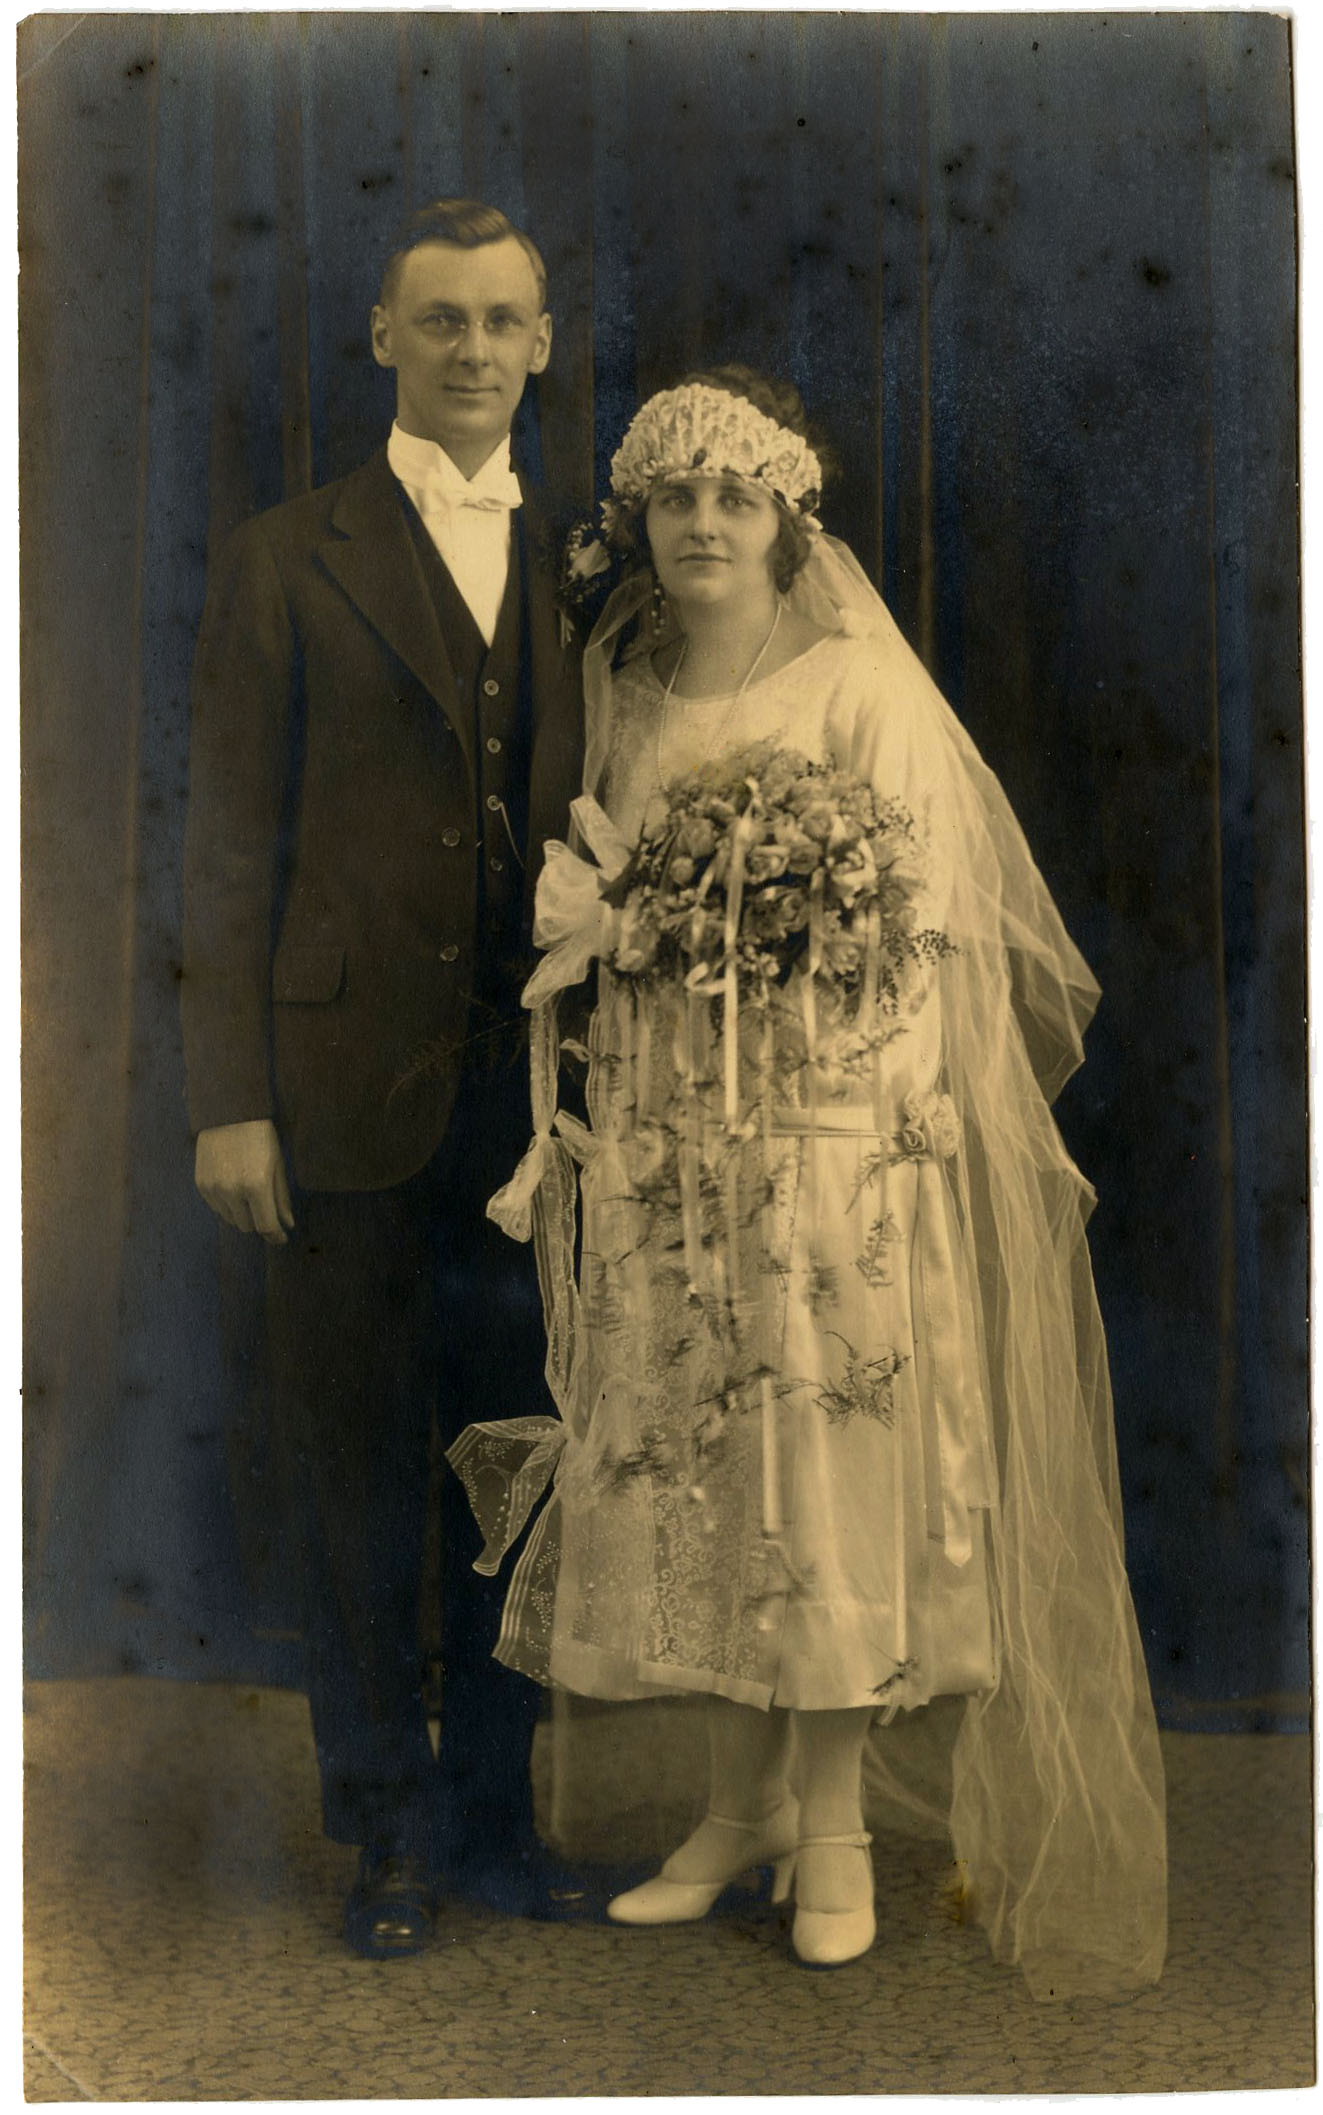 9 Old Wedding Photos - Charming! - The Graphics Fairy